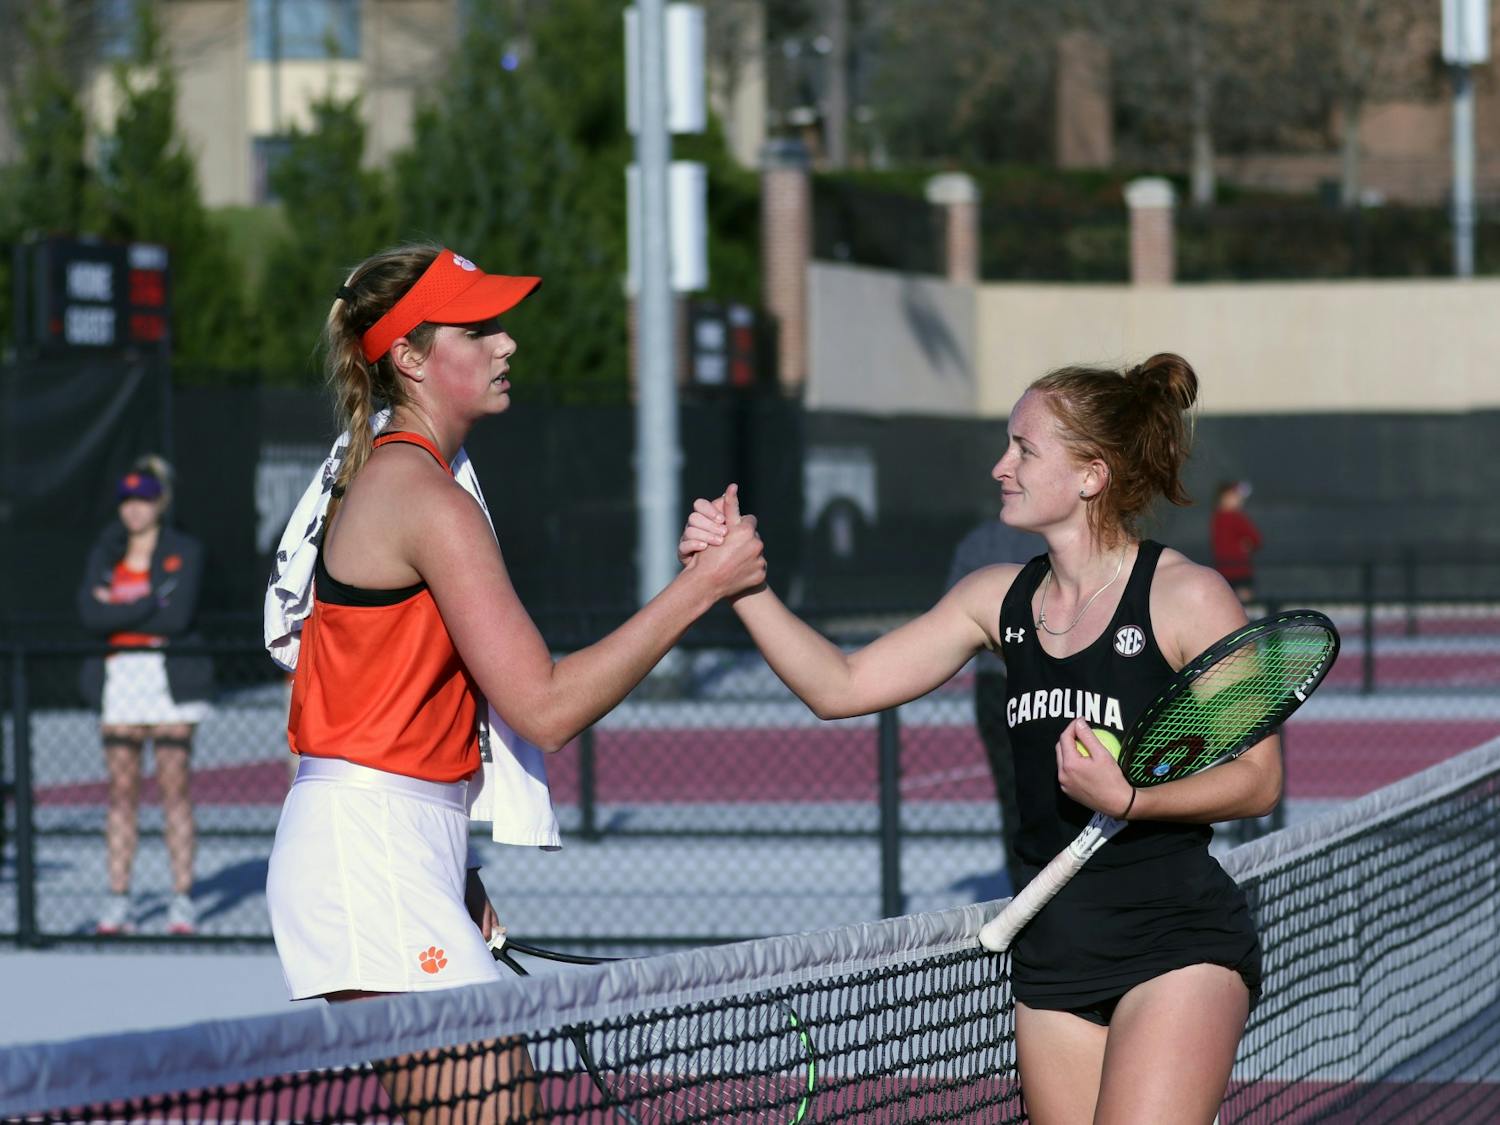 Gamecock junior Megan Davies shakes her opponent's hand after obtaining victory in straight sets. The rest of the Gamecocks followed suit, and overall the Gamecock women's tennis team defeated Clemson 6-1.